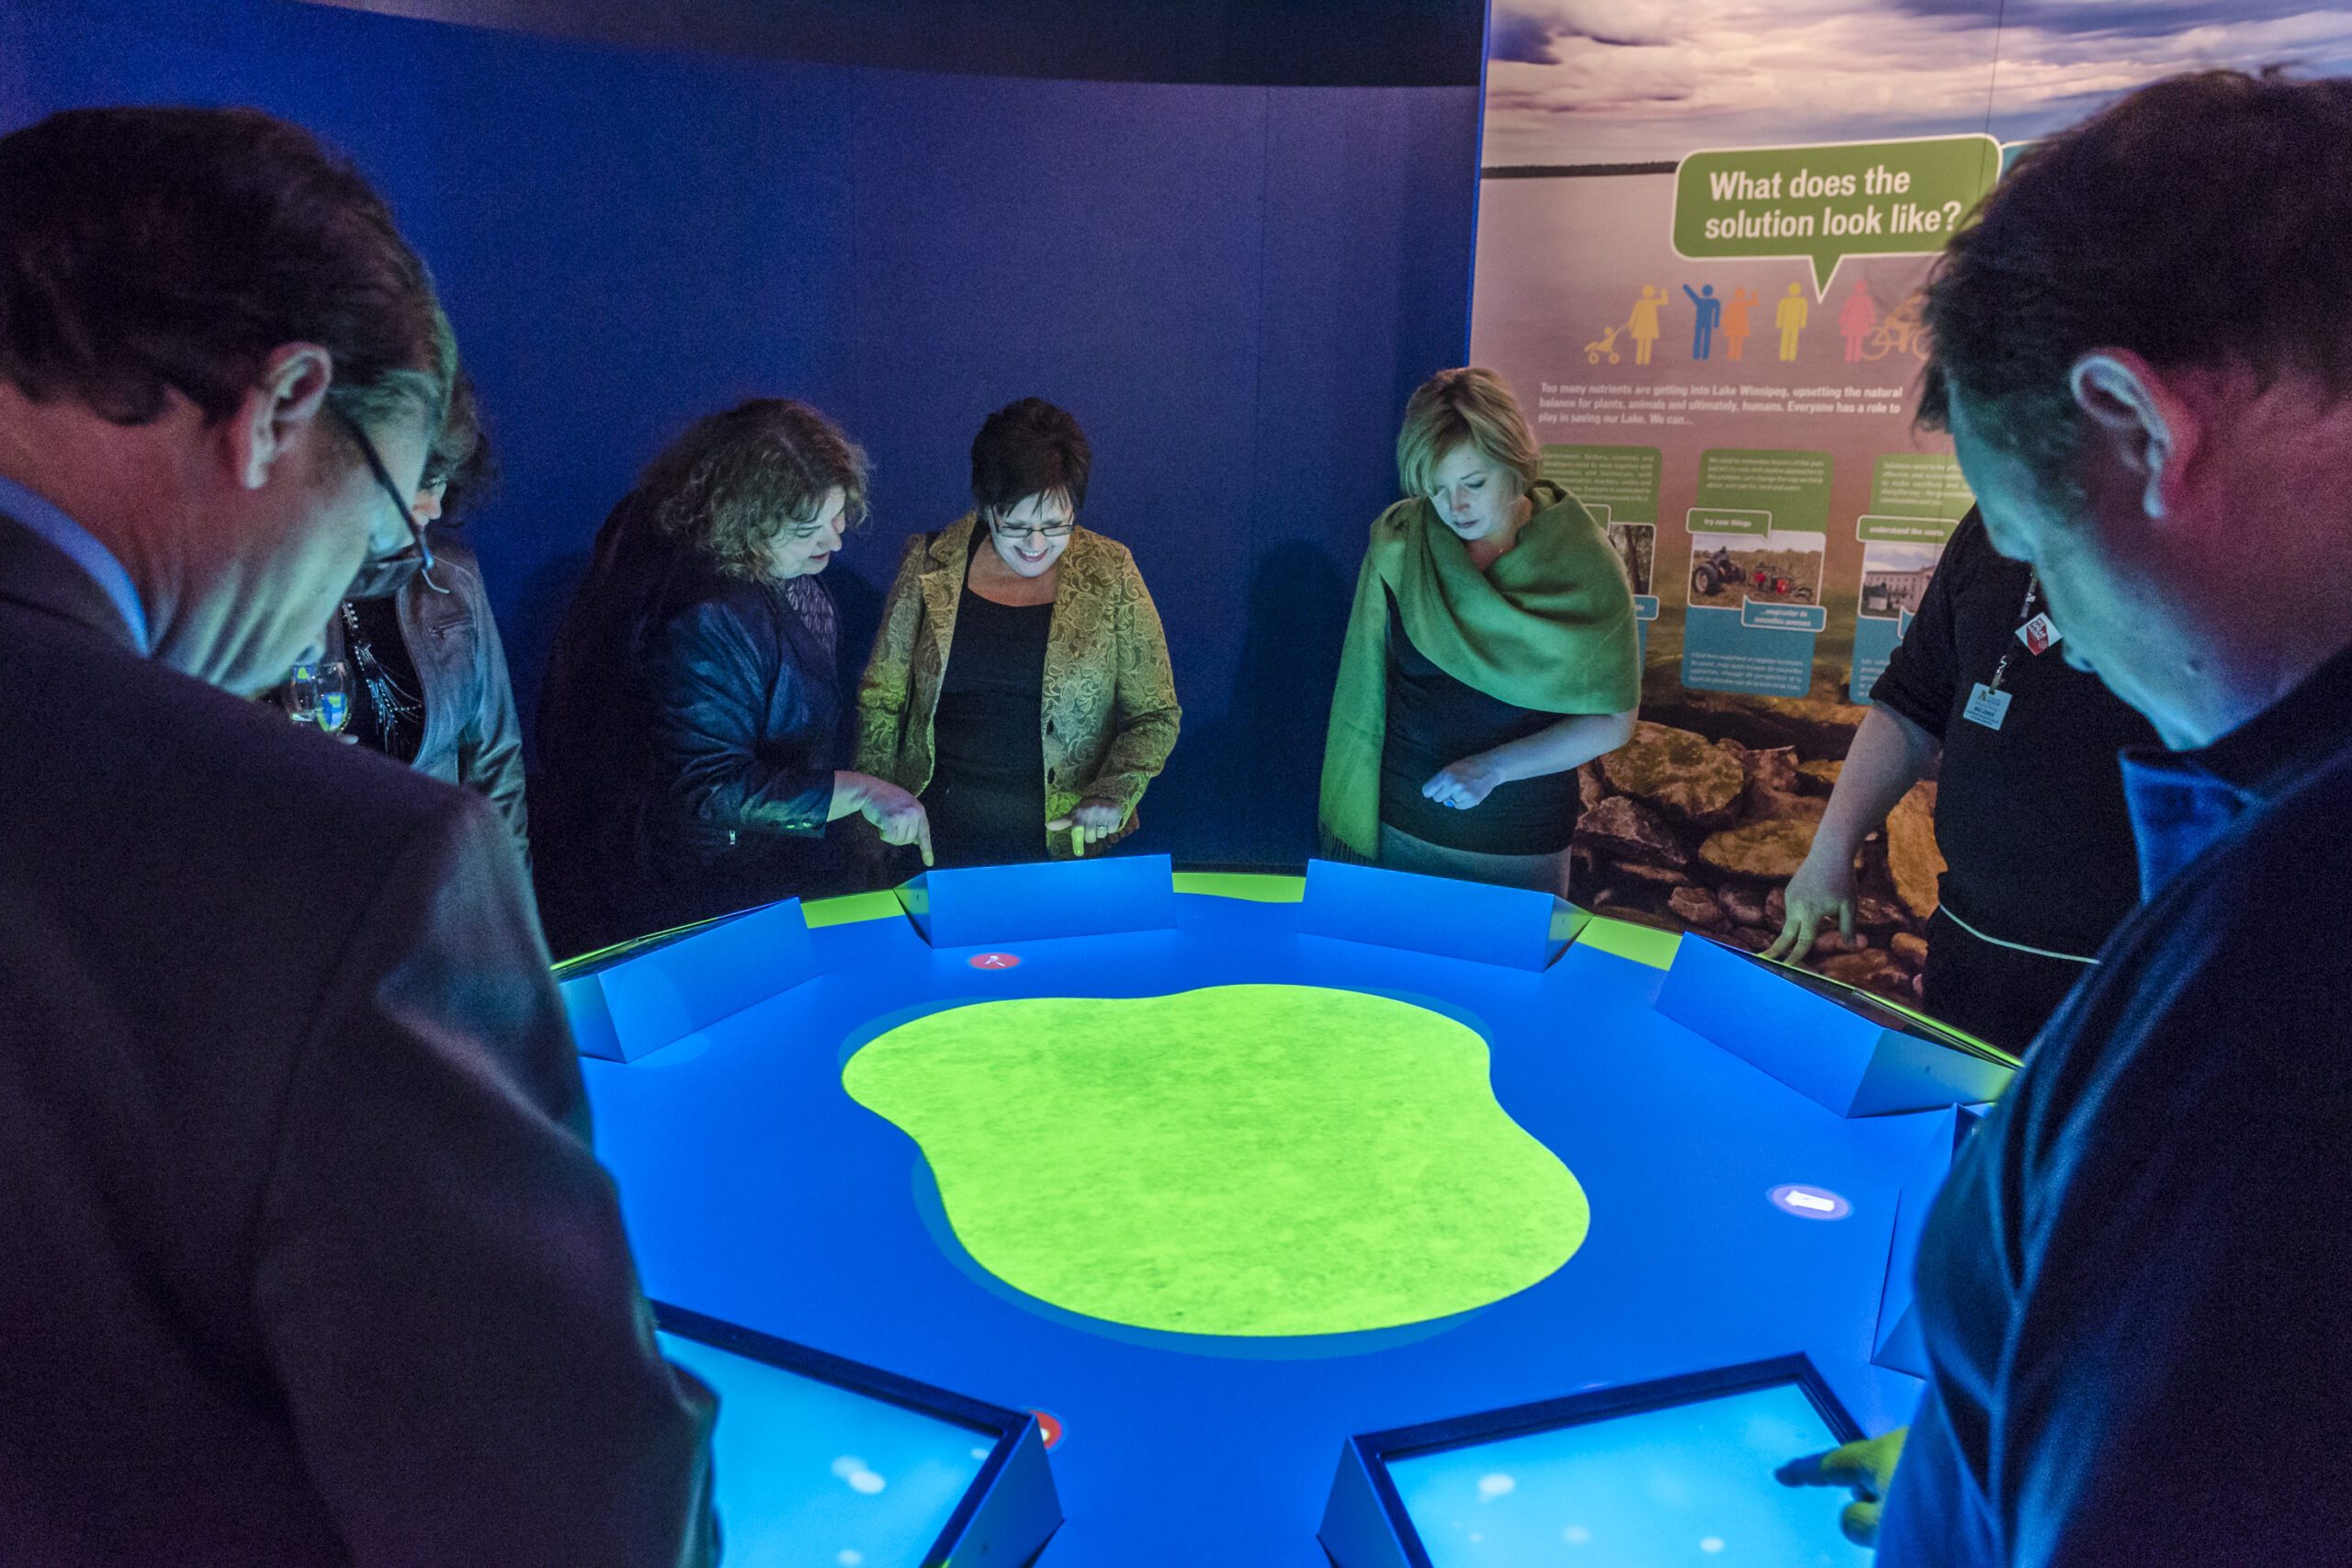 People in business attire engaging with the Lake Winnipeg Shared Solutions simulator in the Science Gallery.